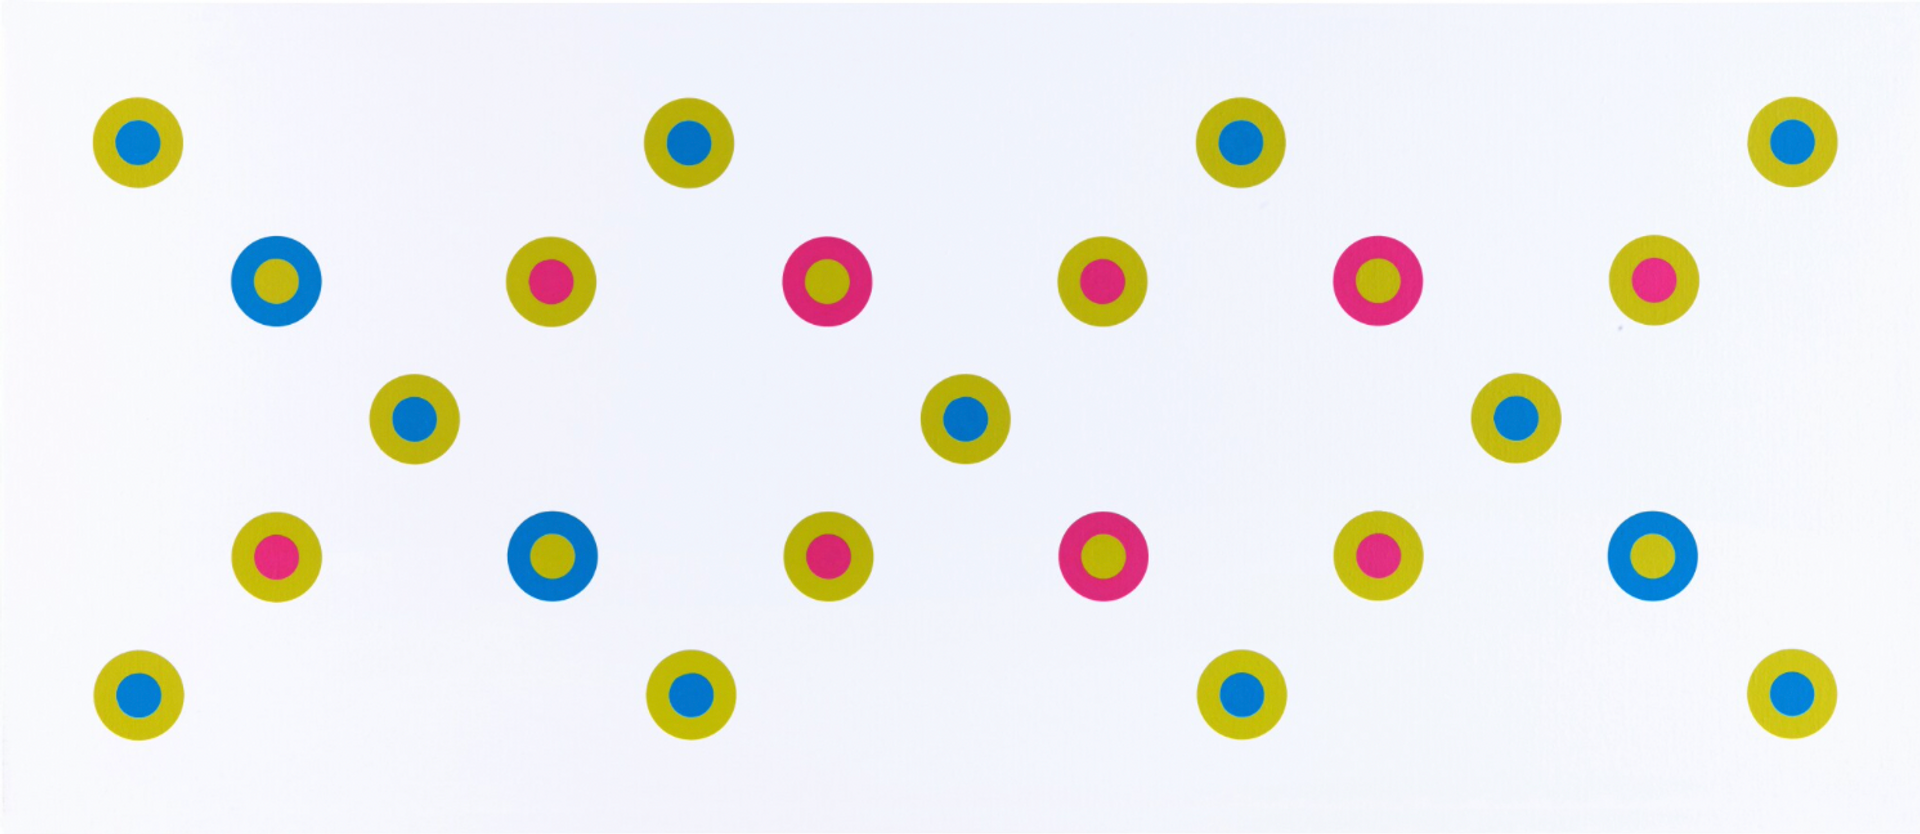 Against a white background, a repeated pattern of spots appear in formation across the composition. The dots vary in different colour combinations of lime green, blue and pink.